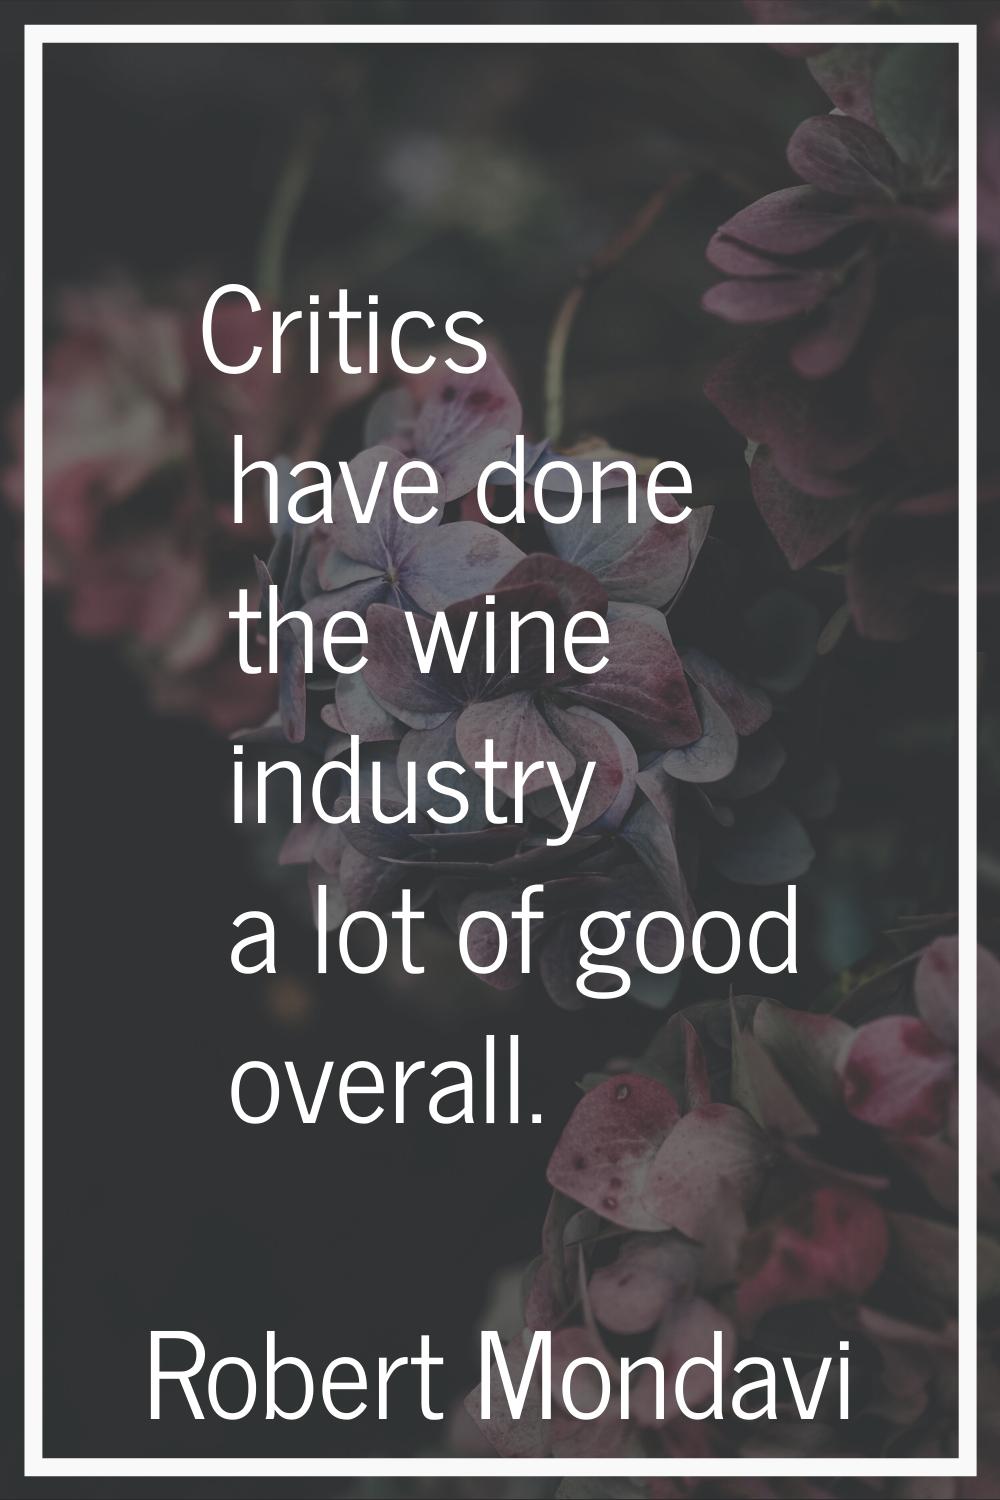 Critics have done the wine industry a lot of good overall.